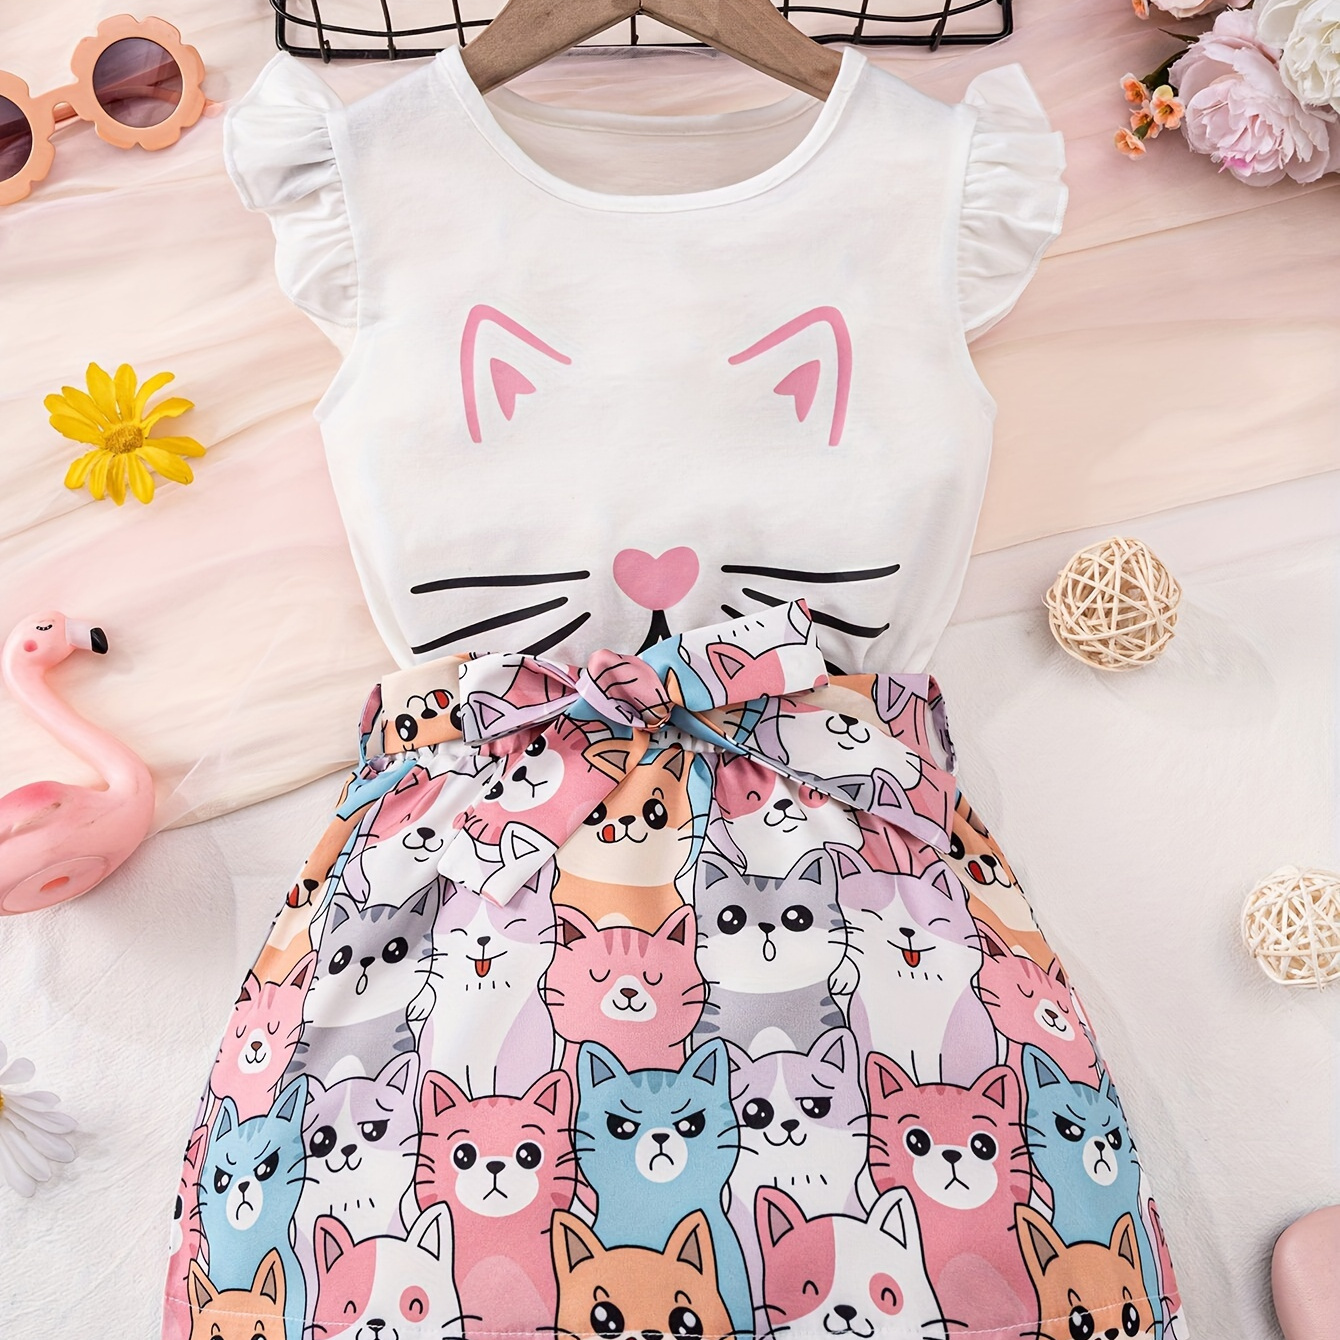 

Girl's 2pcs Outfit Kitty Face Graphic Frill T-shirt Top + Cats Full Print Skirt Holiday Casual Set Summer Clothes Gift